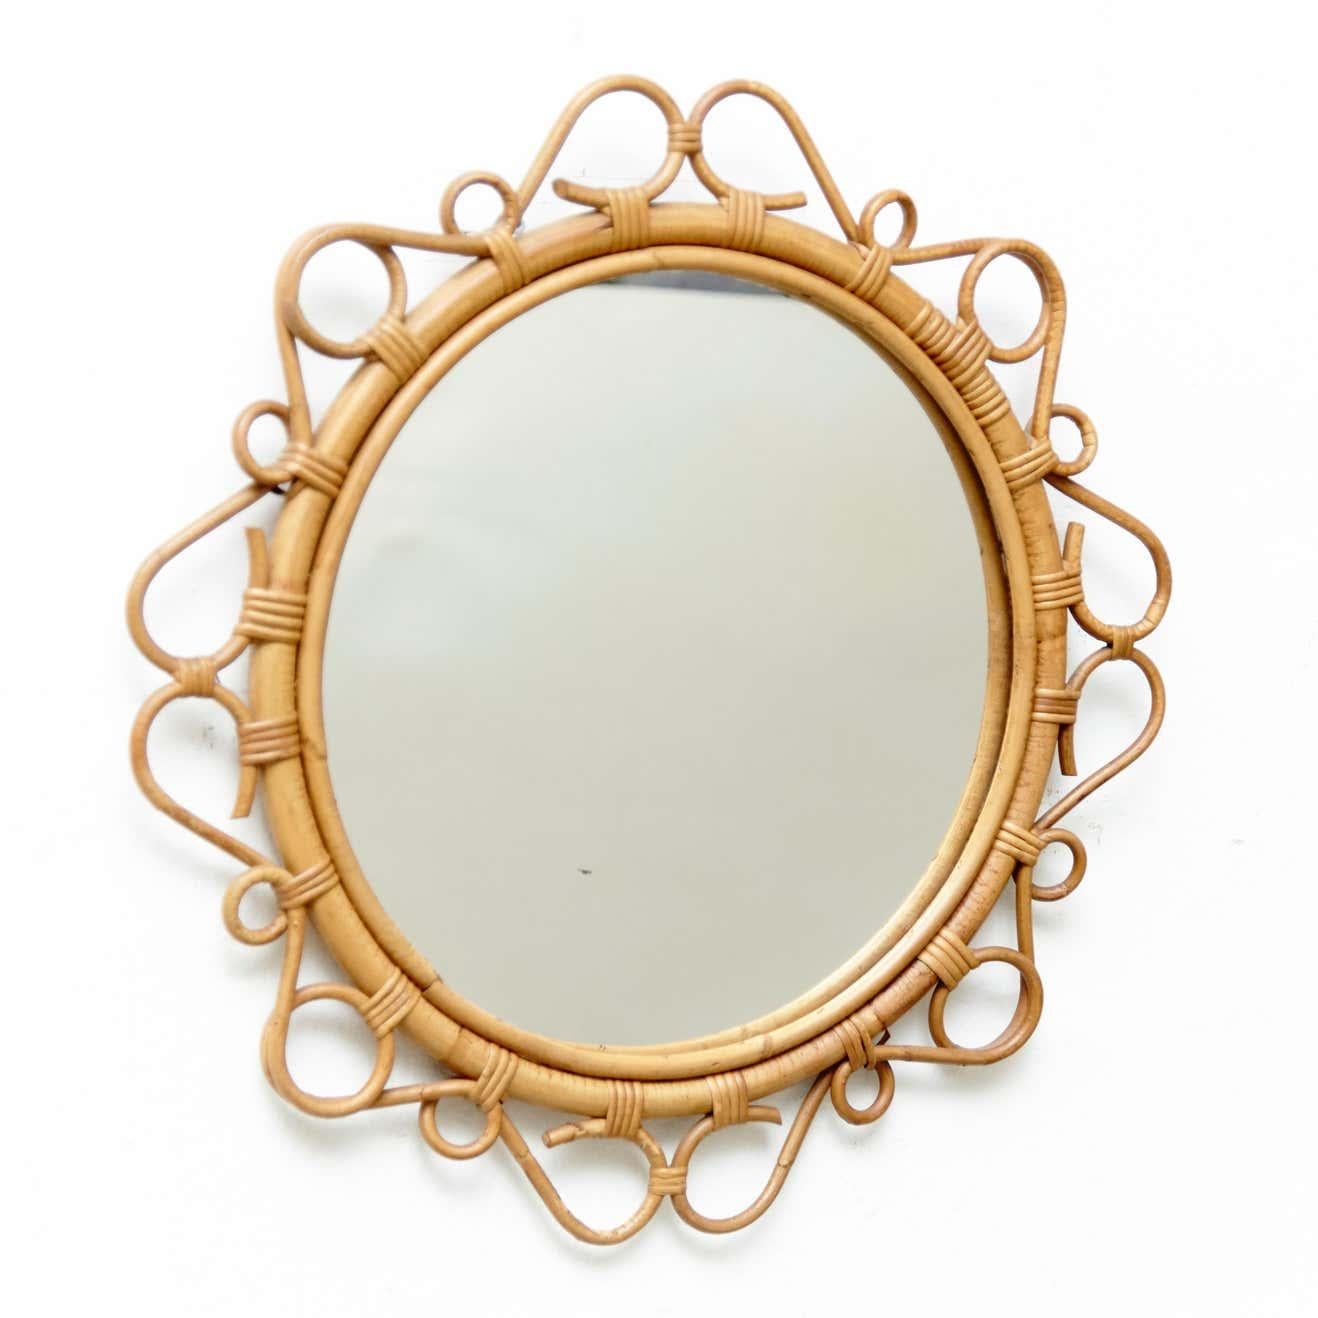 ntroduce vintage coastal charm to your home with this Mid-Century Modern mirror, expertly handcrafted from bamboo and rattan. Dating back to circa 1960, this mirror was traditionally manufactured in the French Riviera.

The intricate design of this